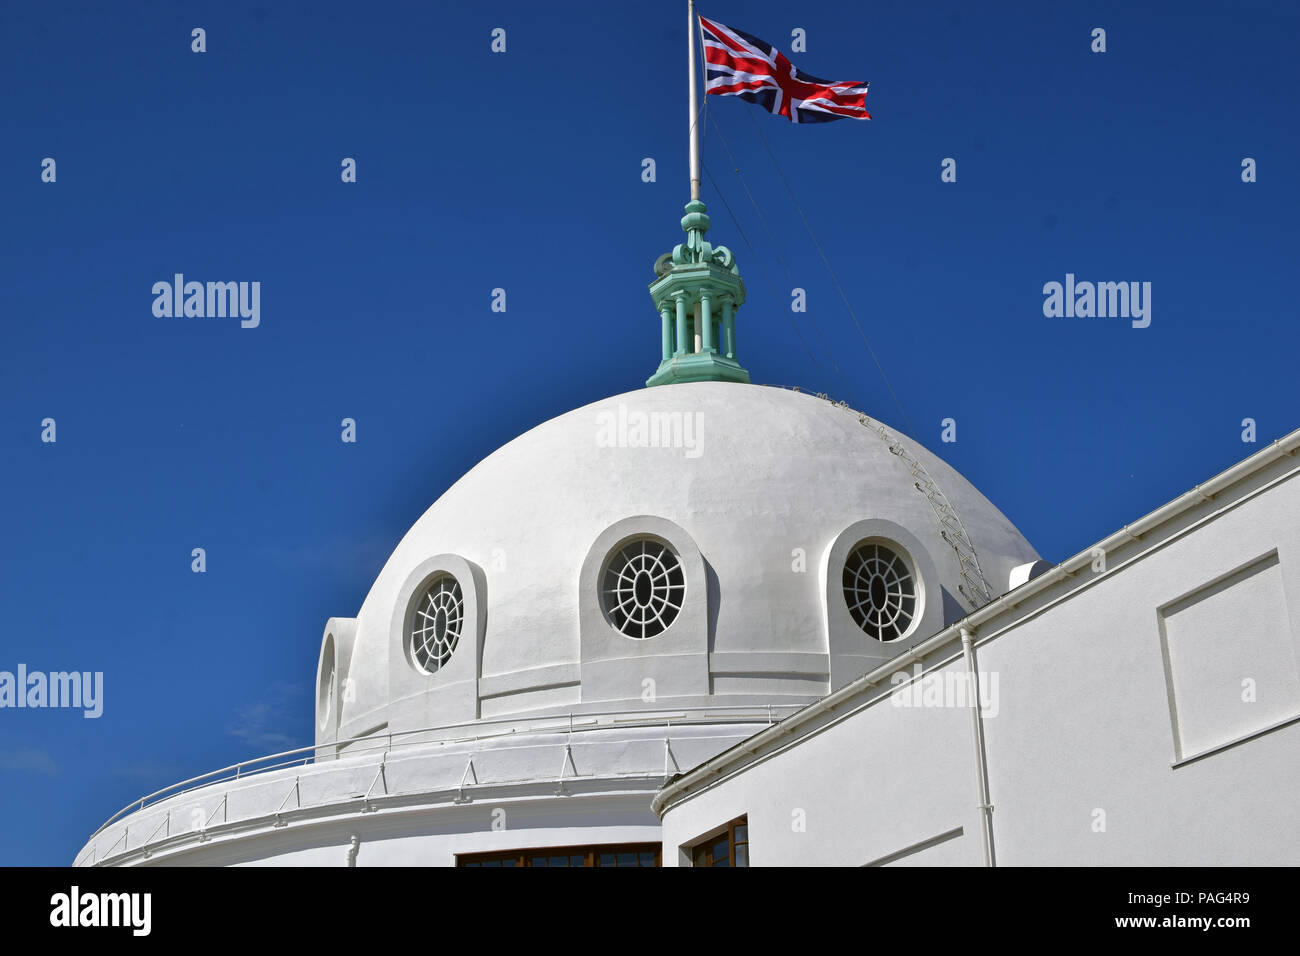 Spanish City dome following regeneration at Whitley Bay 2018 Stock Photo